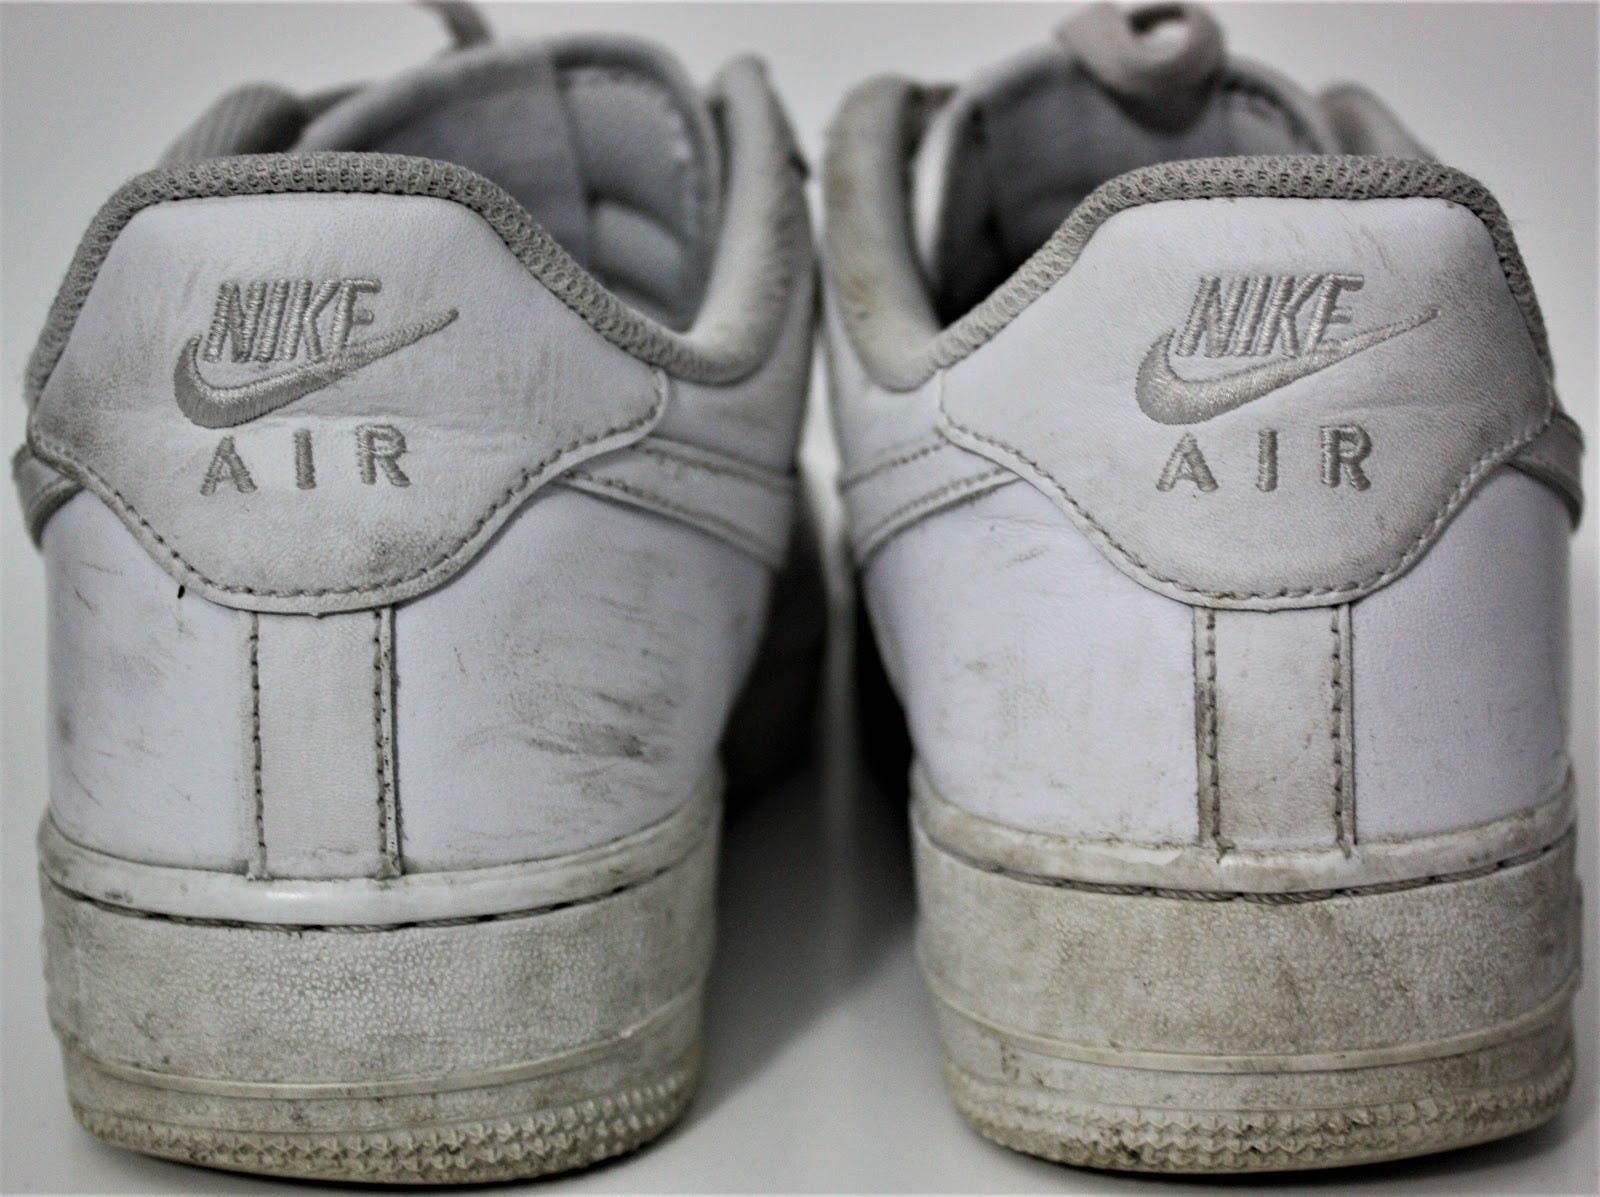 do nike air force 1 get dirty easily